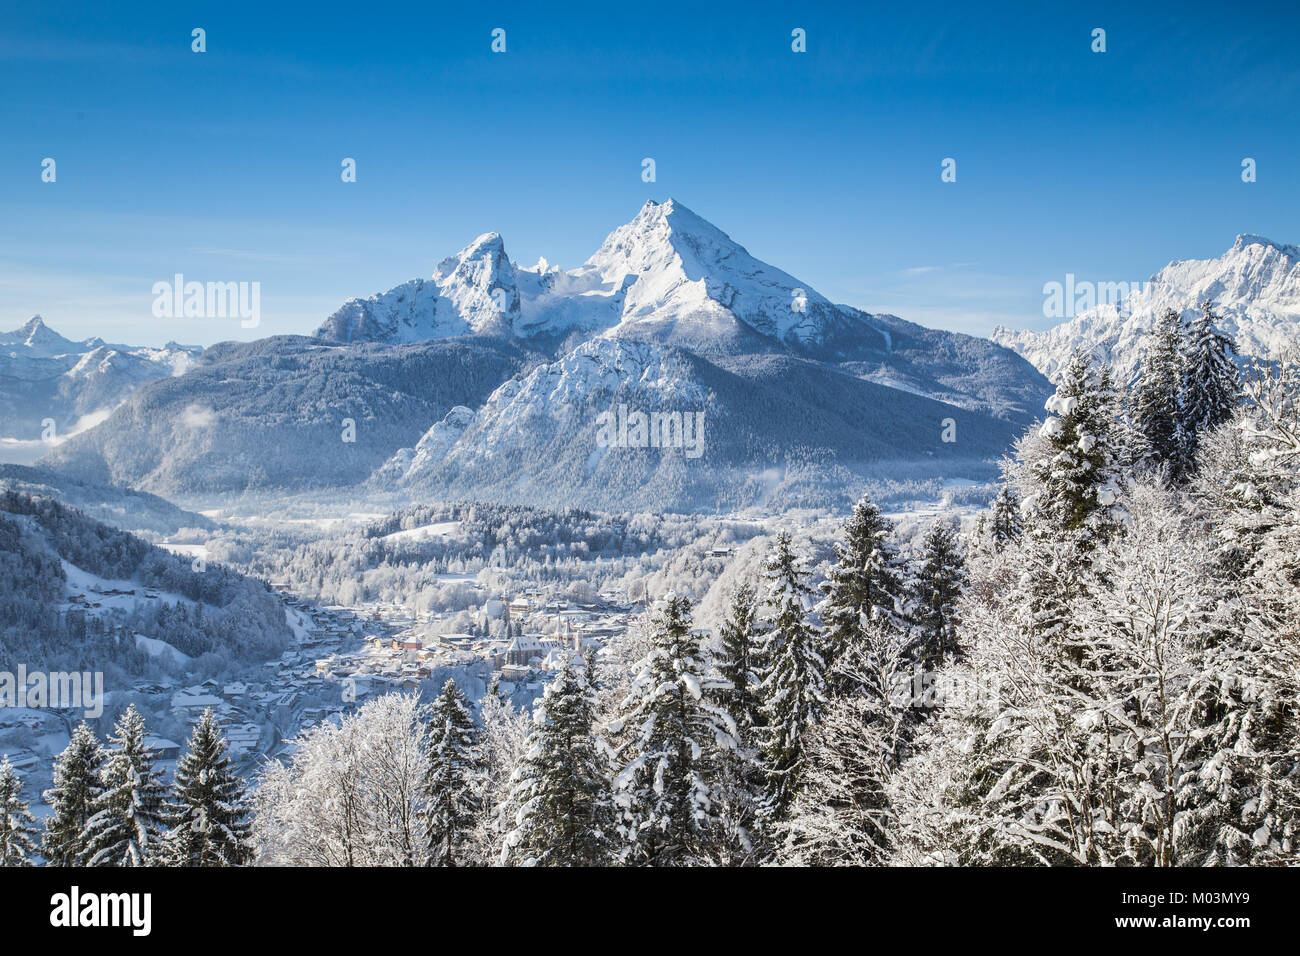 Beautiful mountain landscape in the Bavarian Alps with village of Berchtesgaden and Watzmann mountain in winter, Germany Stock Photo